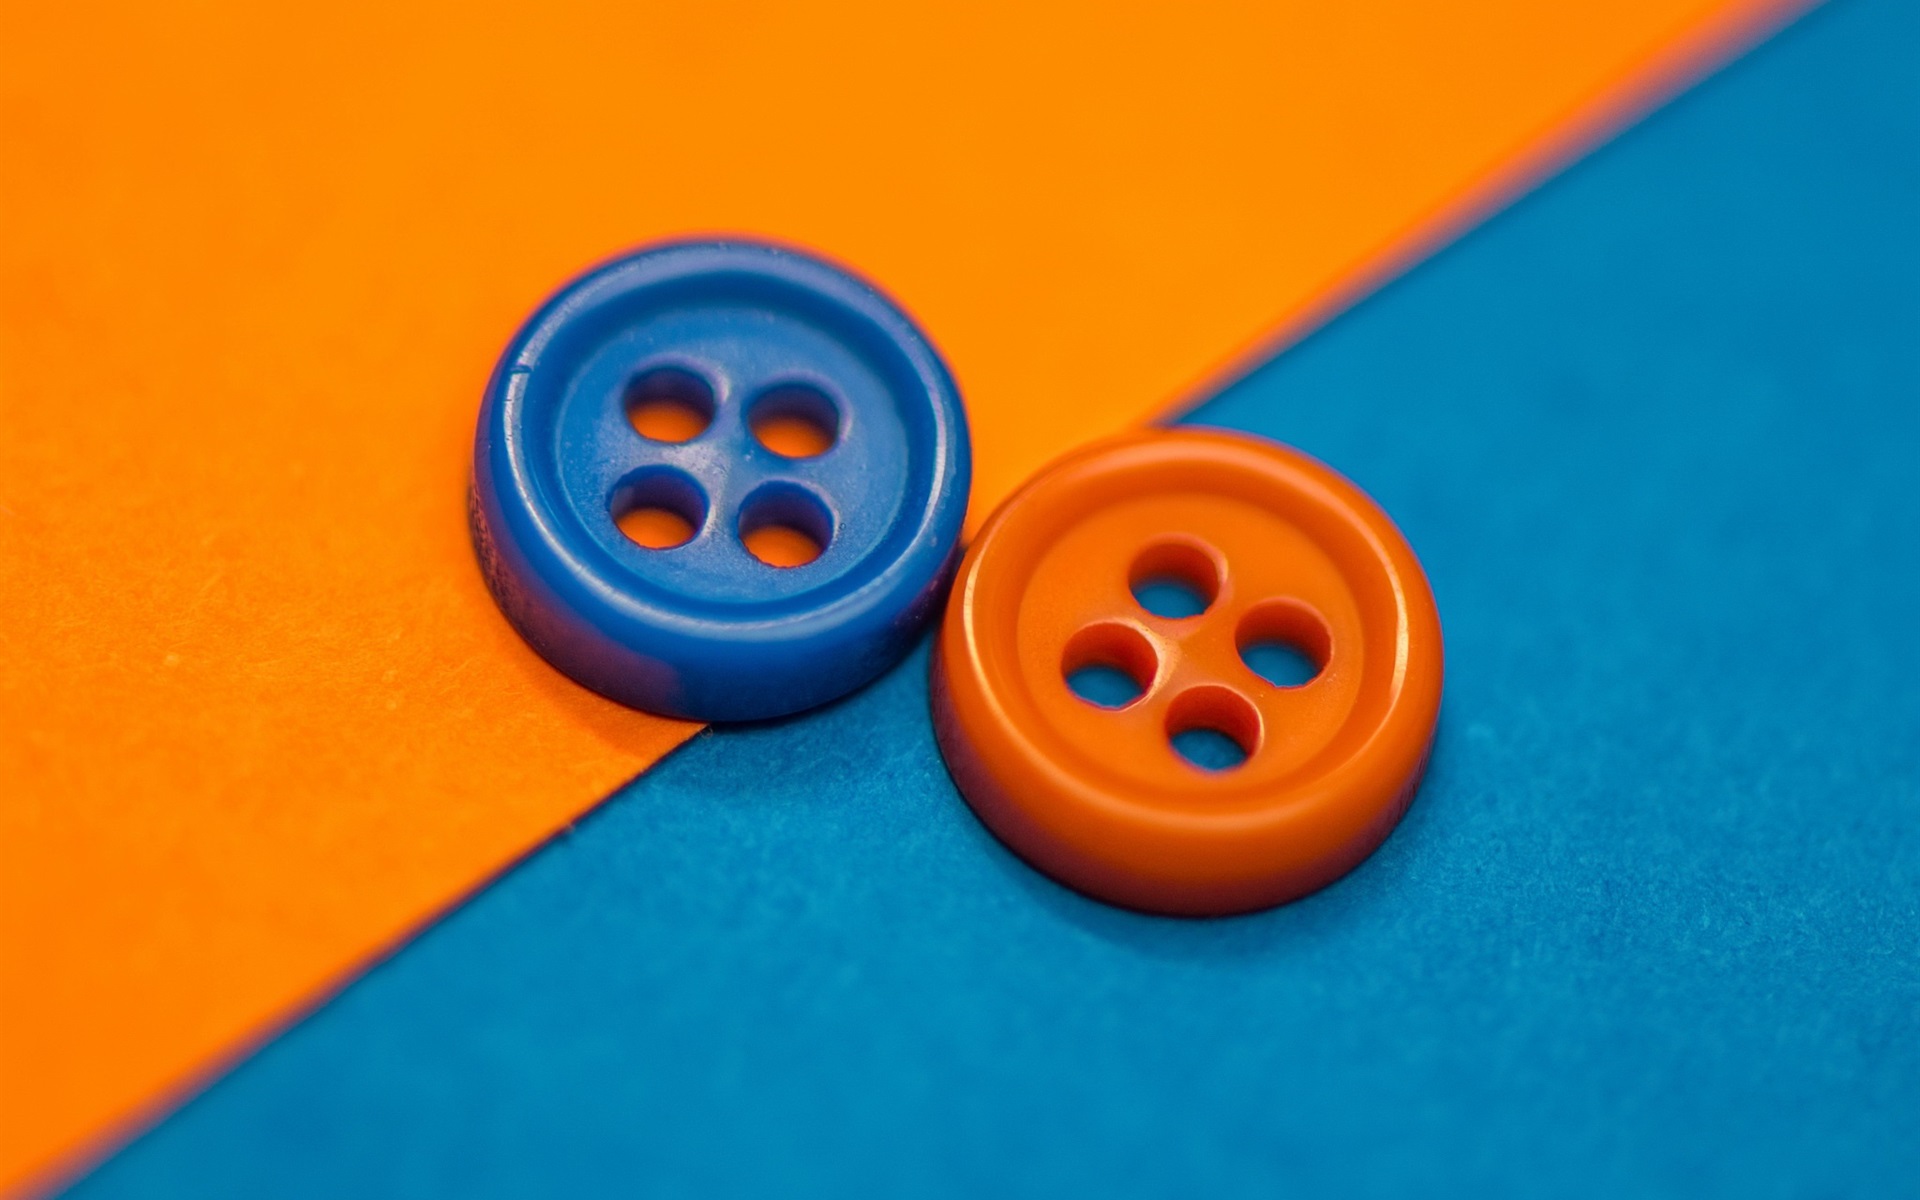 Wallpaper Two Buttons, Orange And Blue - Orange And Blue Buttons - HD Wallpaper 